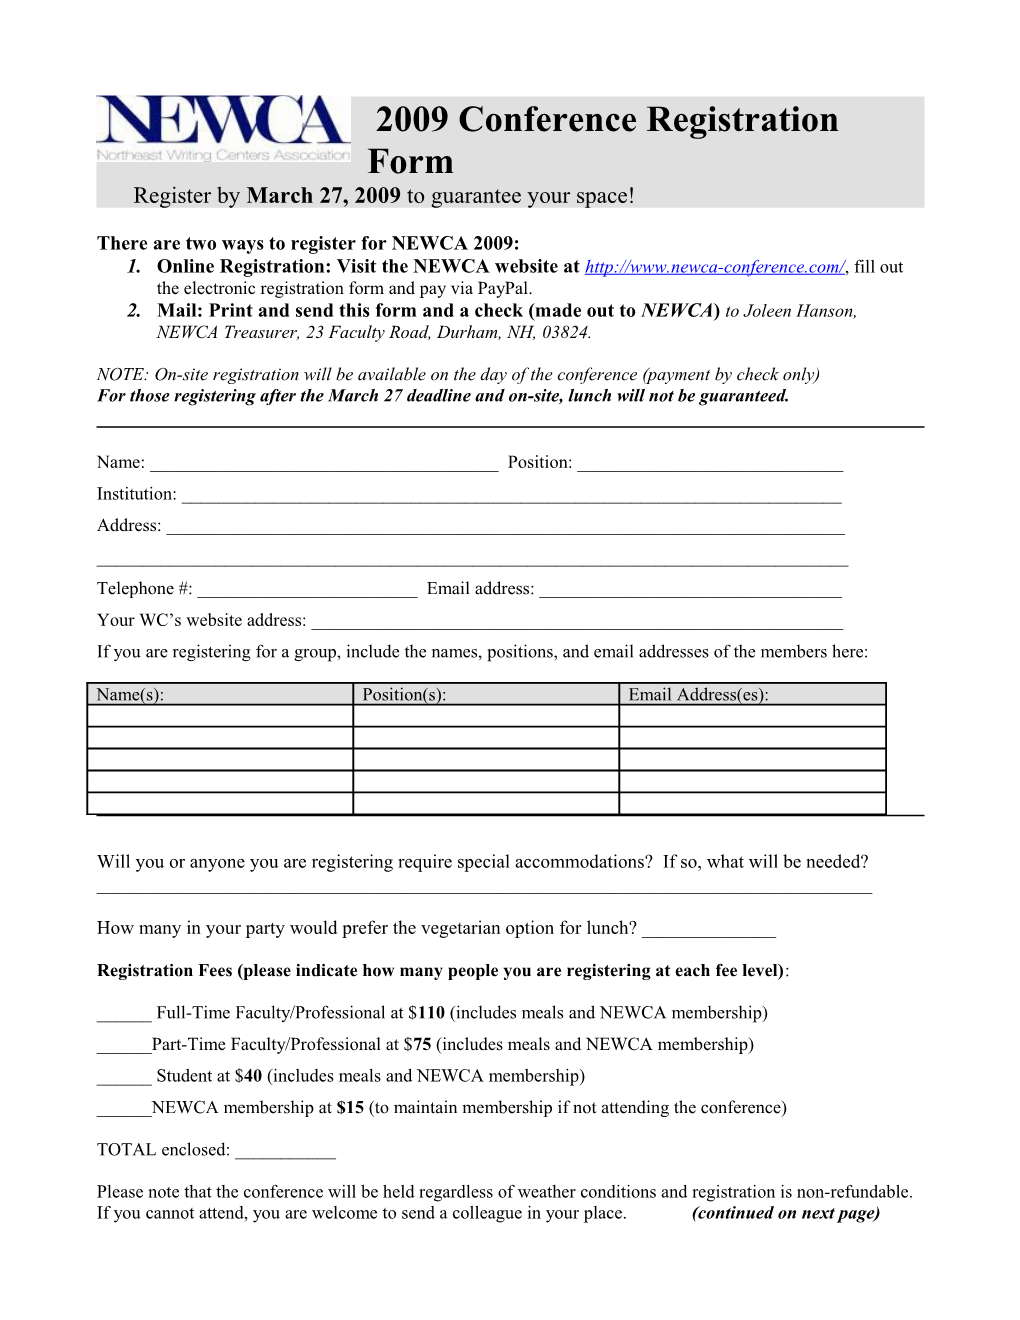 NEWCA Conference 2008 Registration Form Due by April 1, 2008